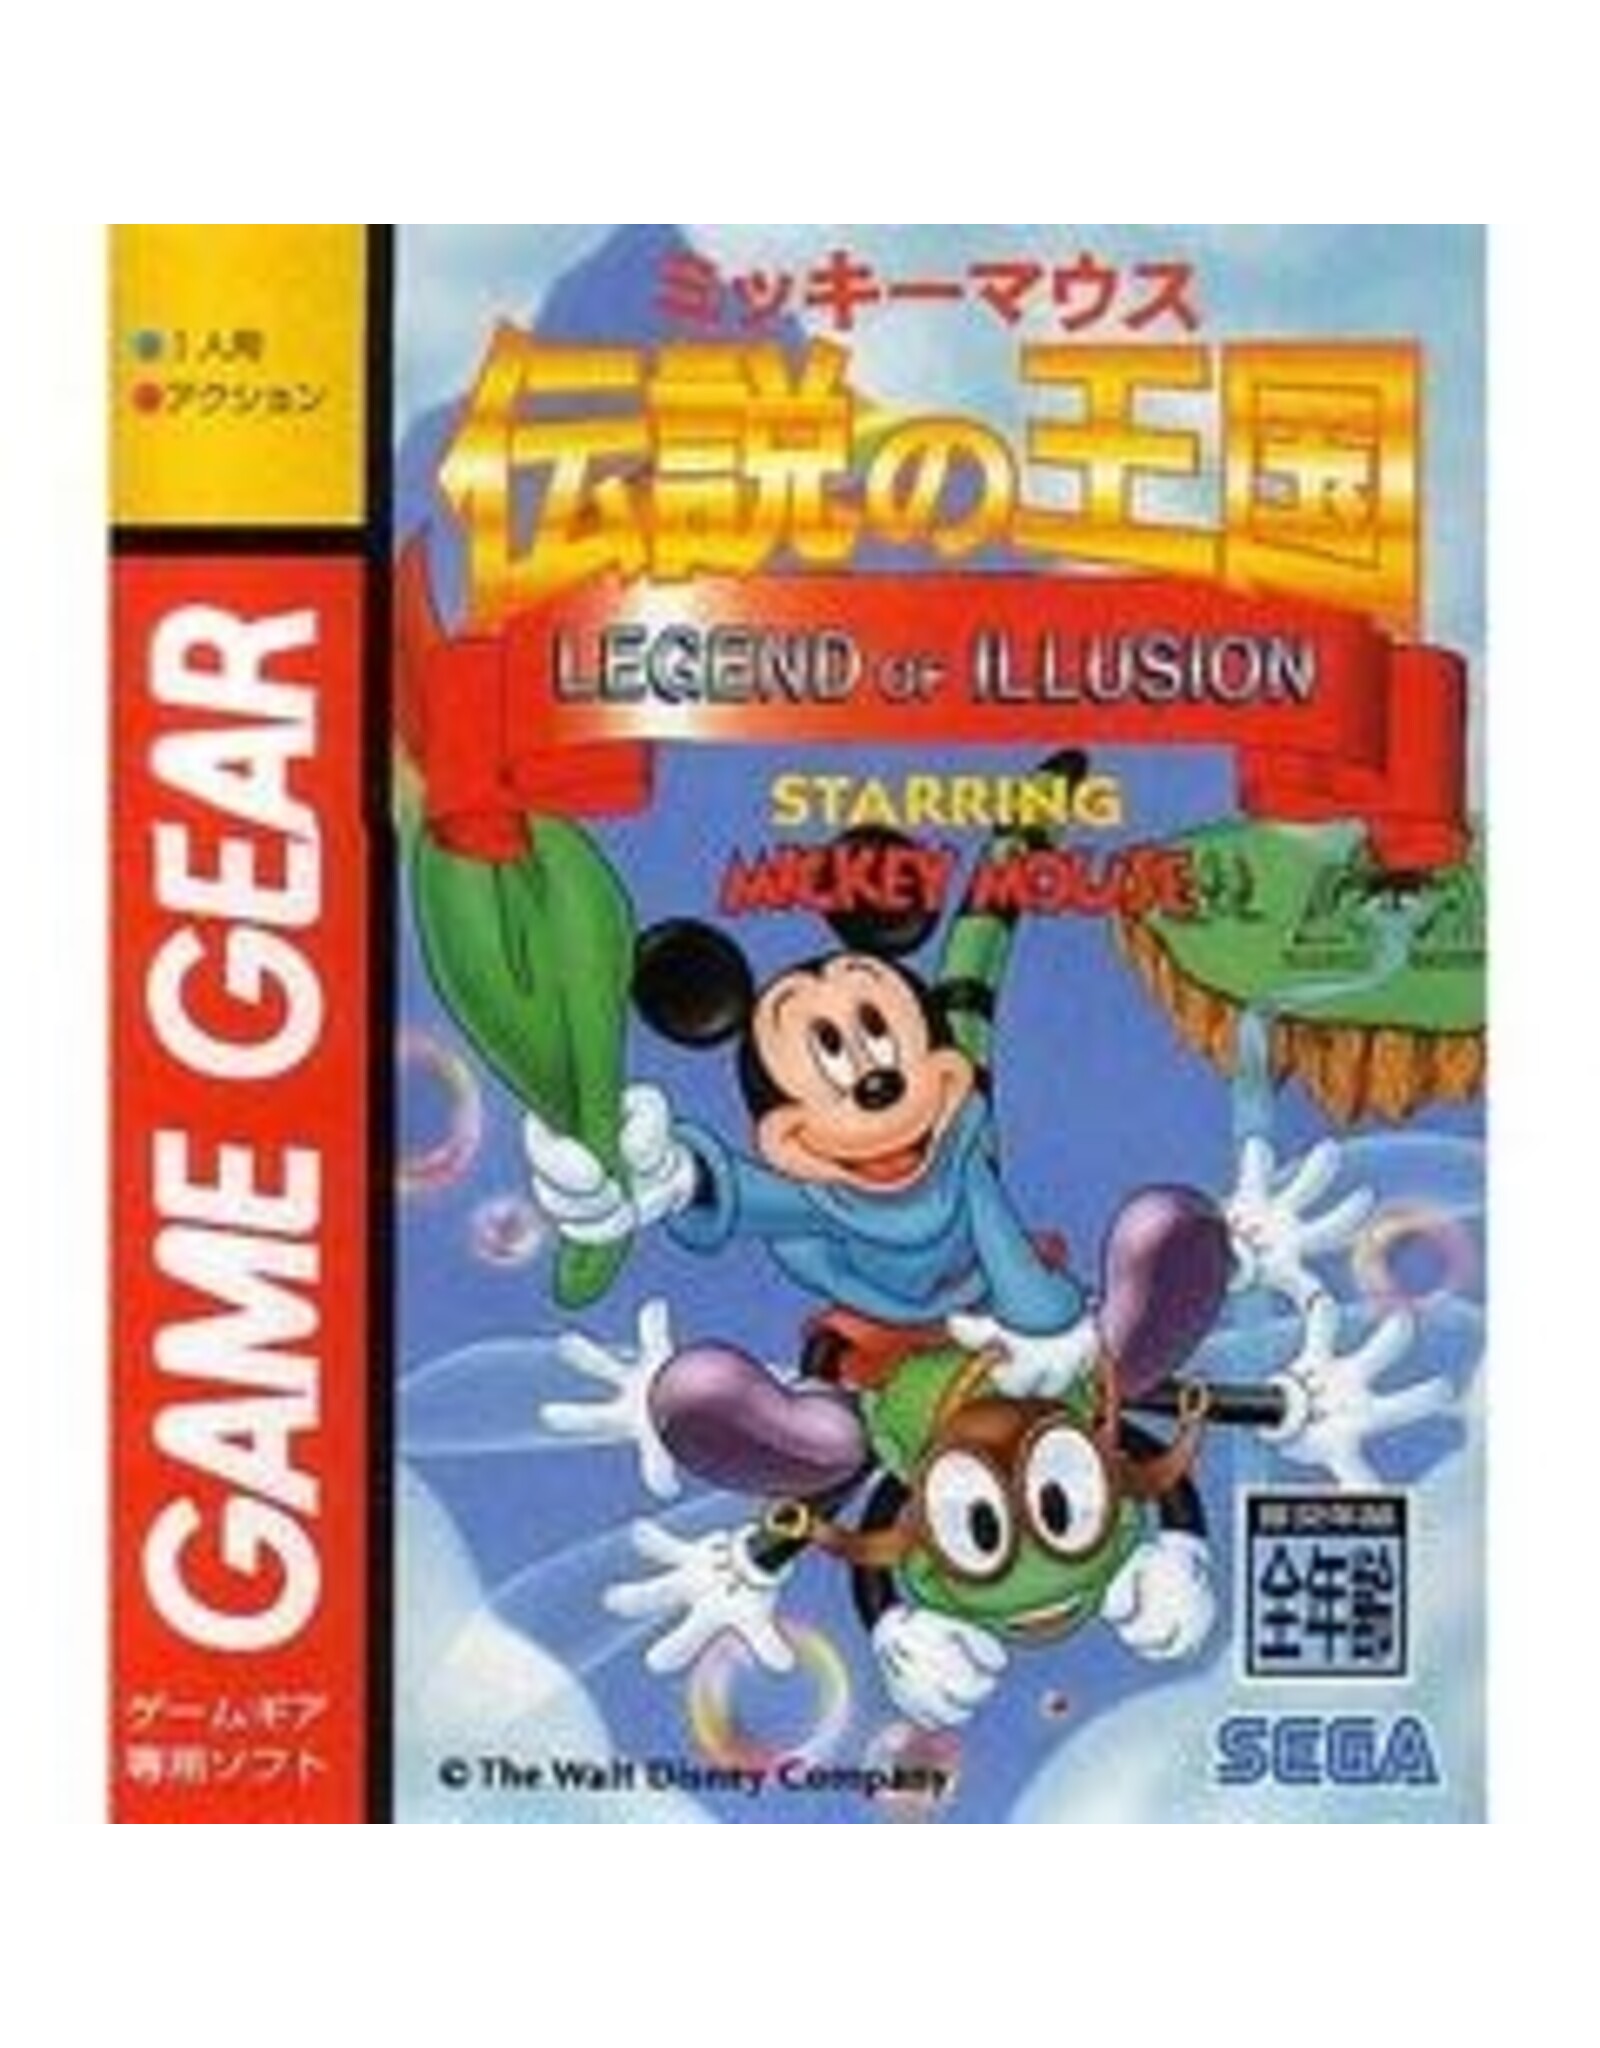 Sega Game Gear Legend of Illusion Starring Mickey Mouse (Cart Only, JP Import)